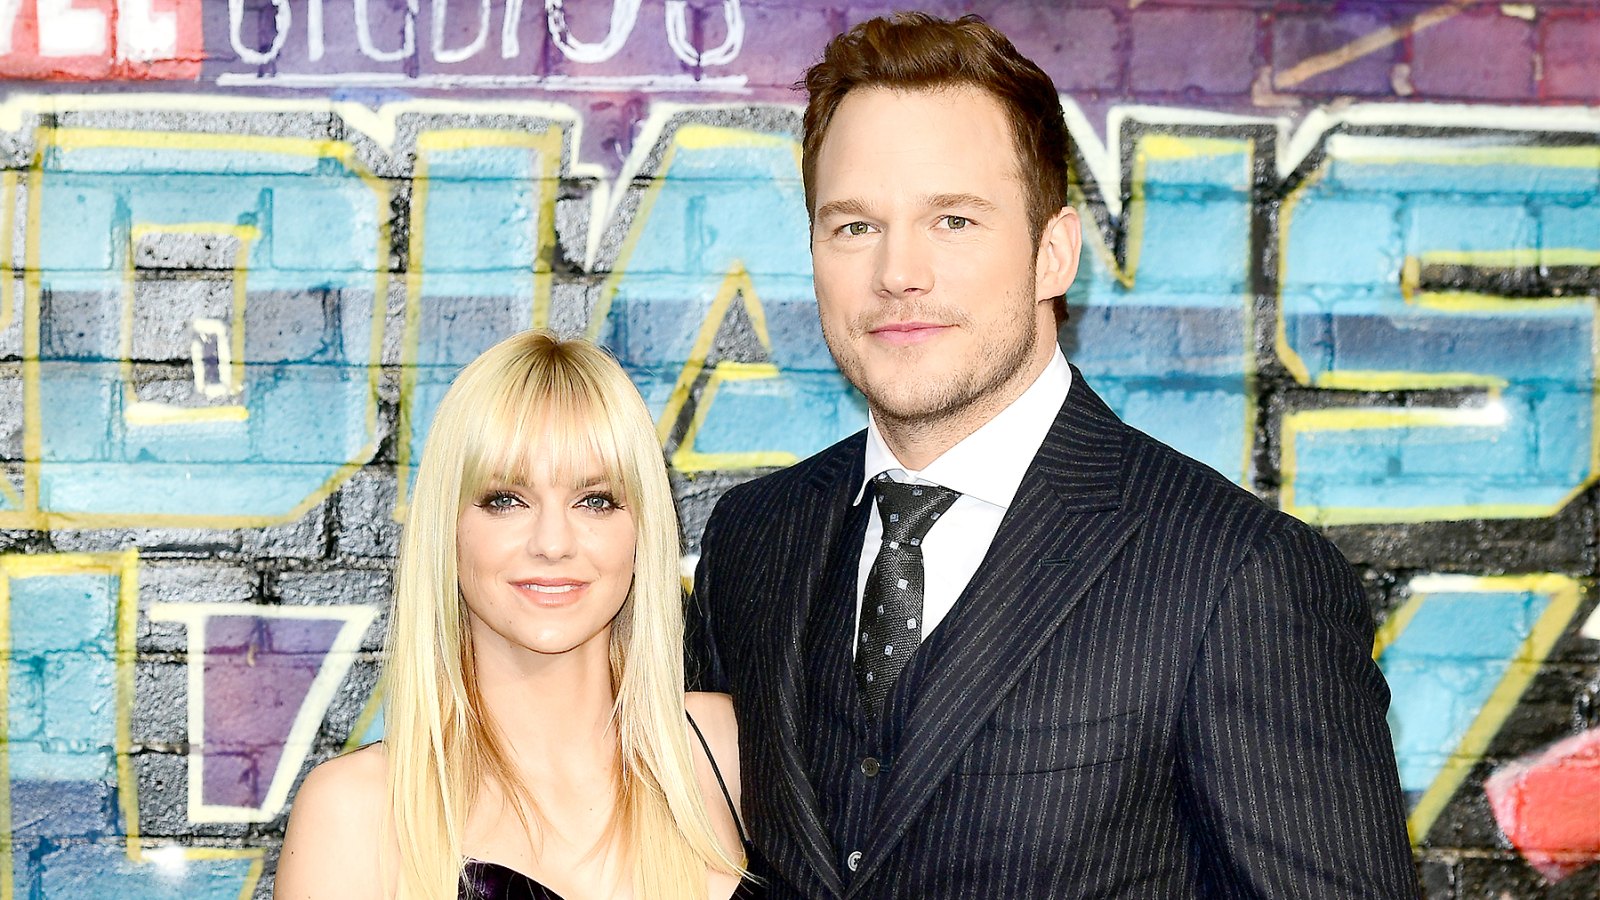 Chris Pratt and Anna Faris attend the European Premiere of Guardians of the Galaxy Vol. 2 held at the Eventim Apollo, London, April 24, 2017.